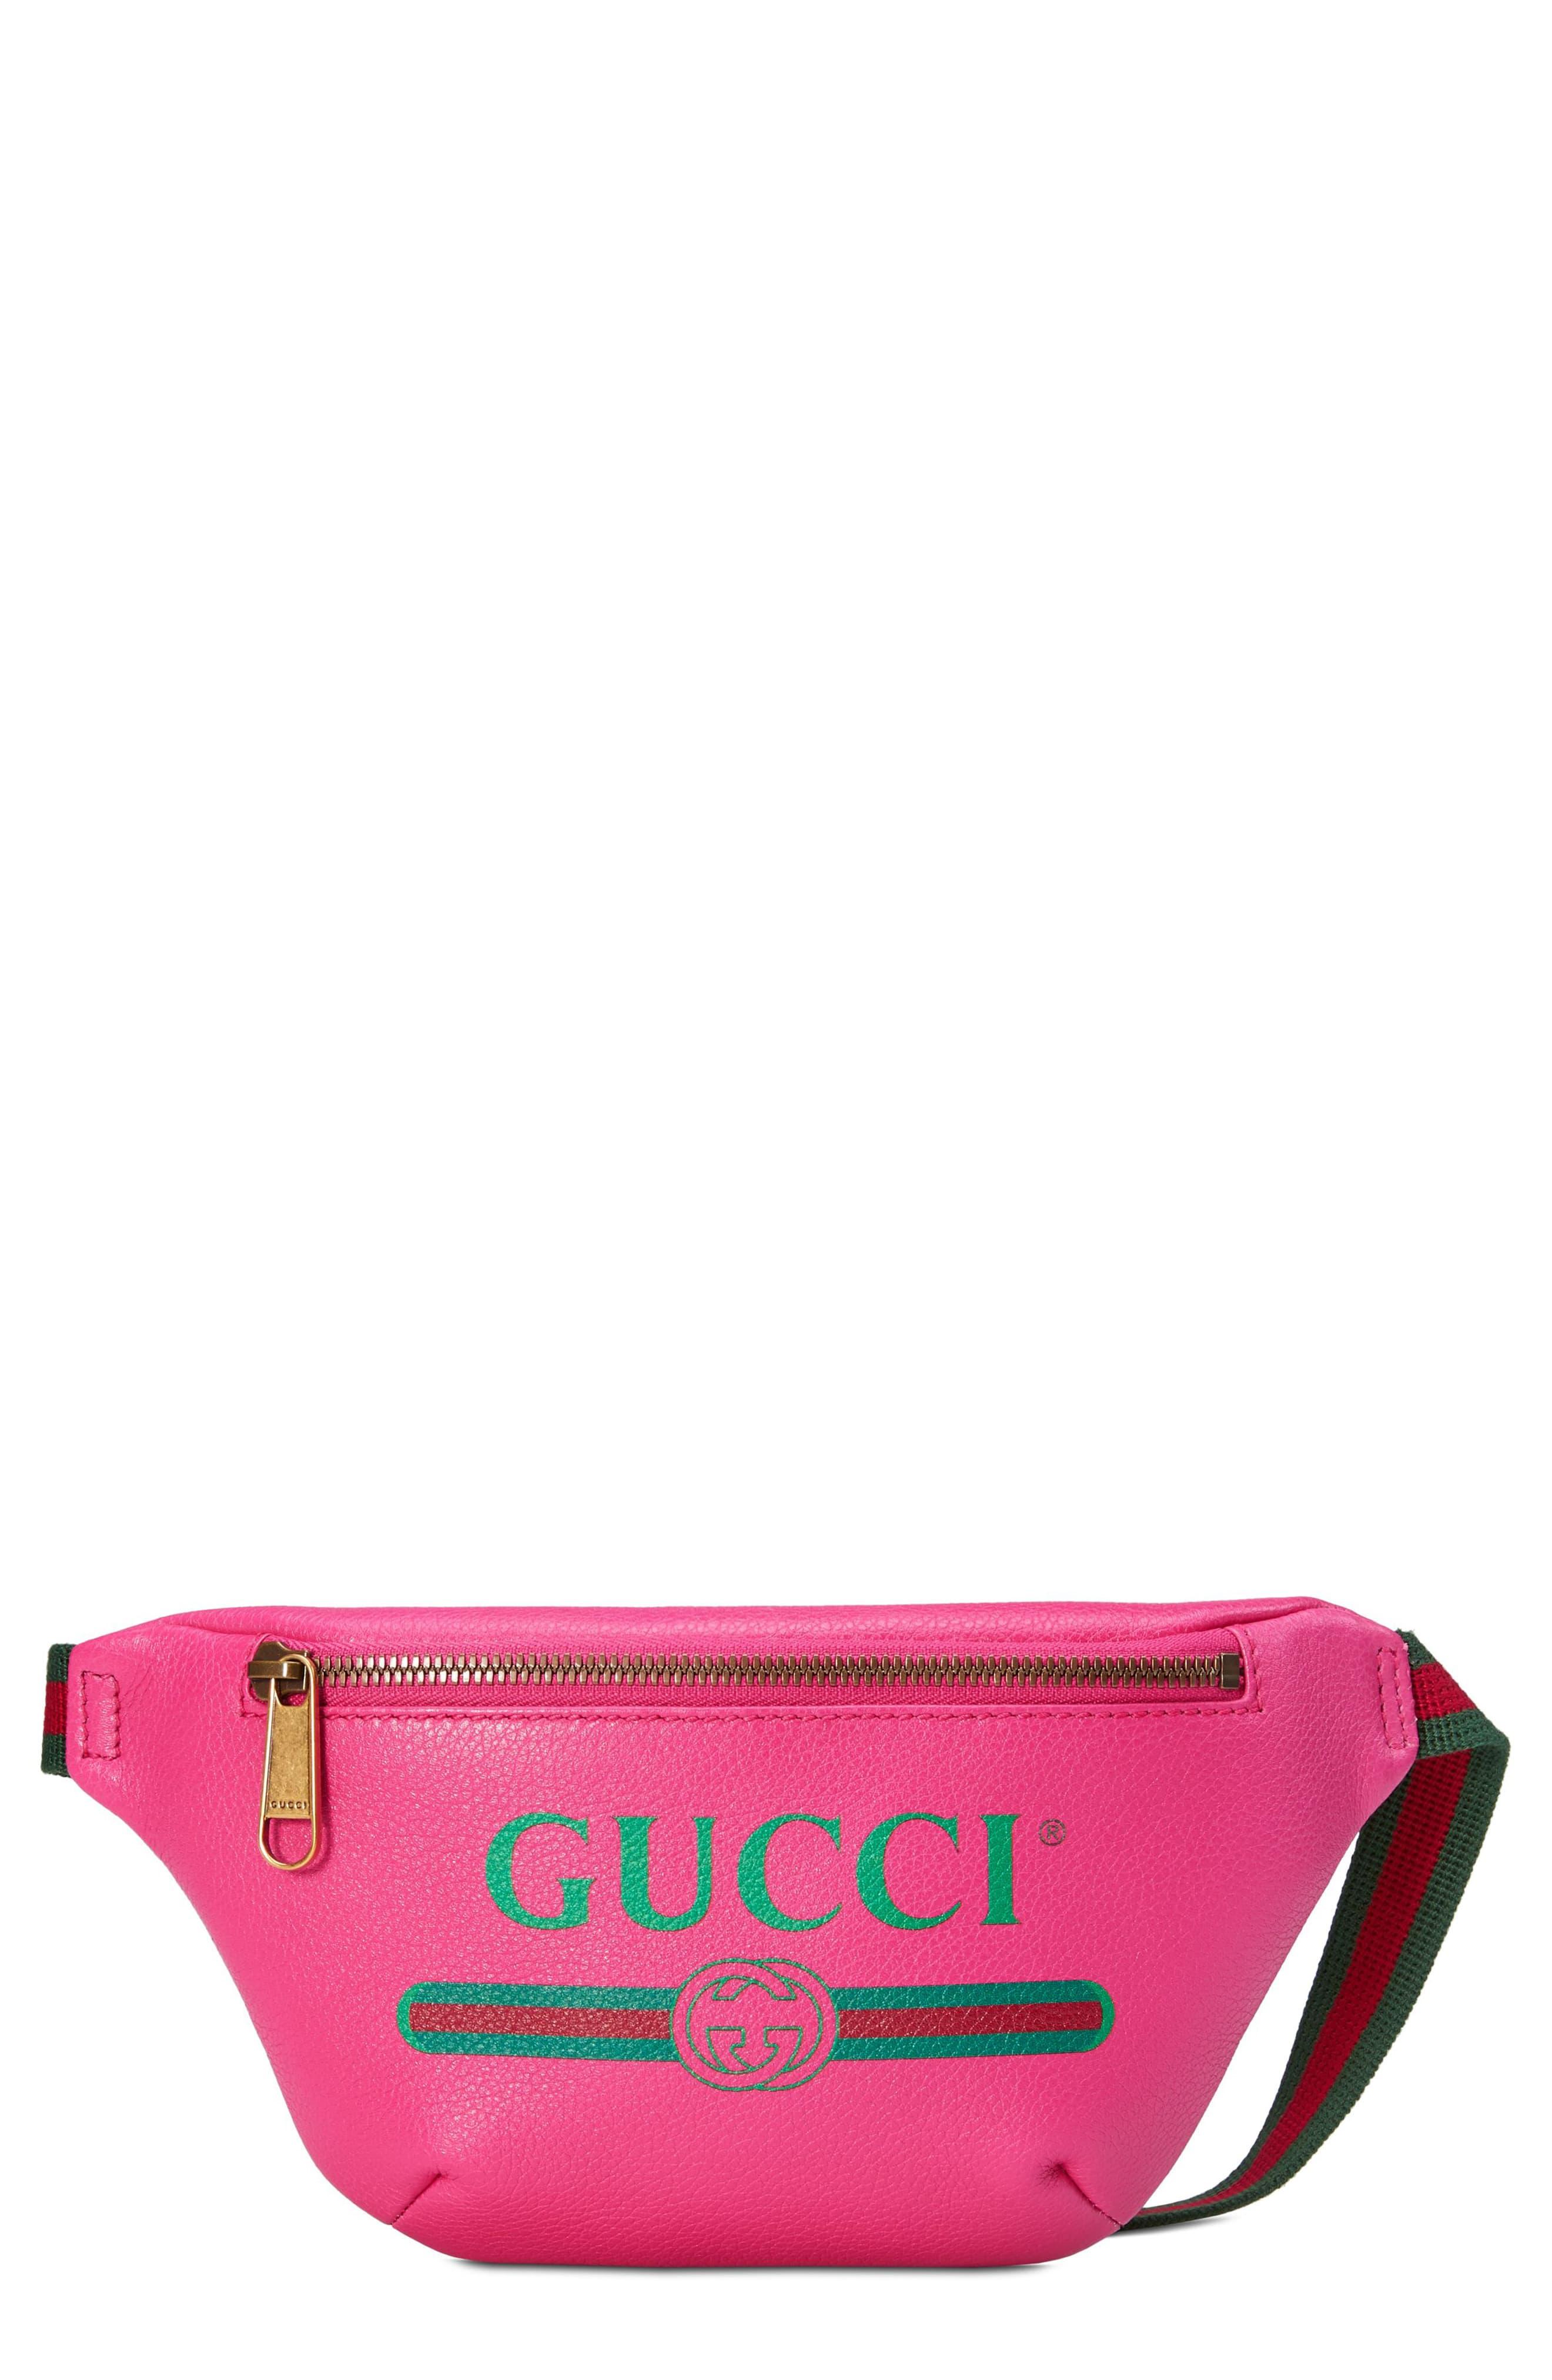 Gucci Leather Belt Bag in Pink - Lyst